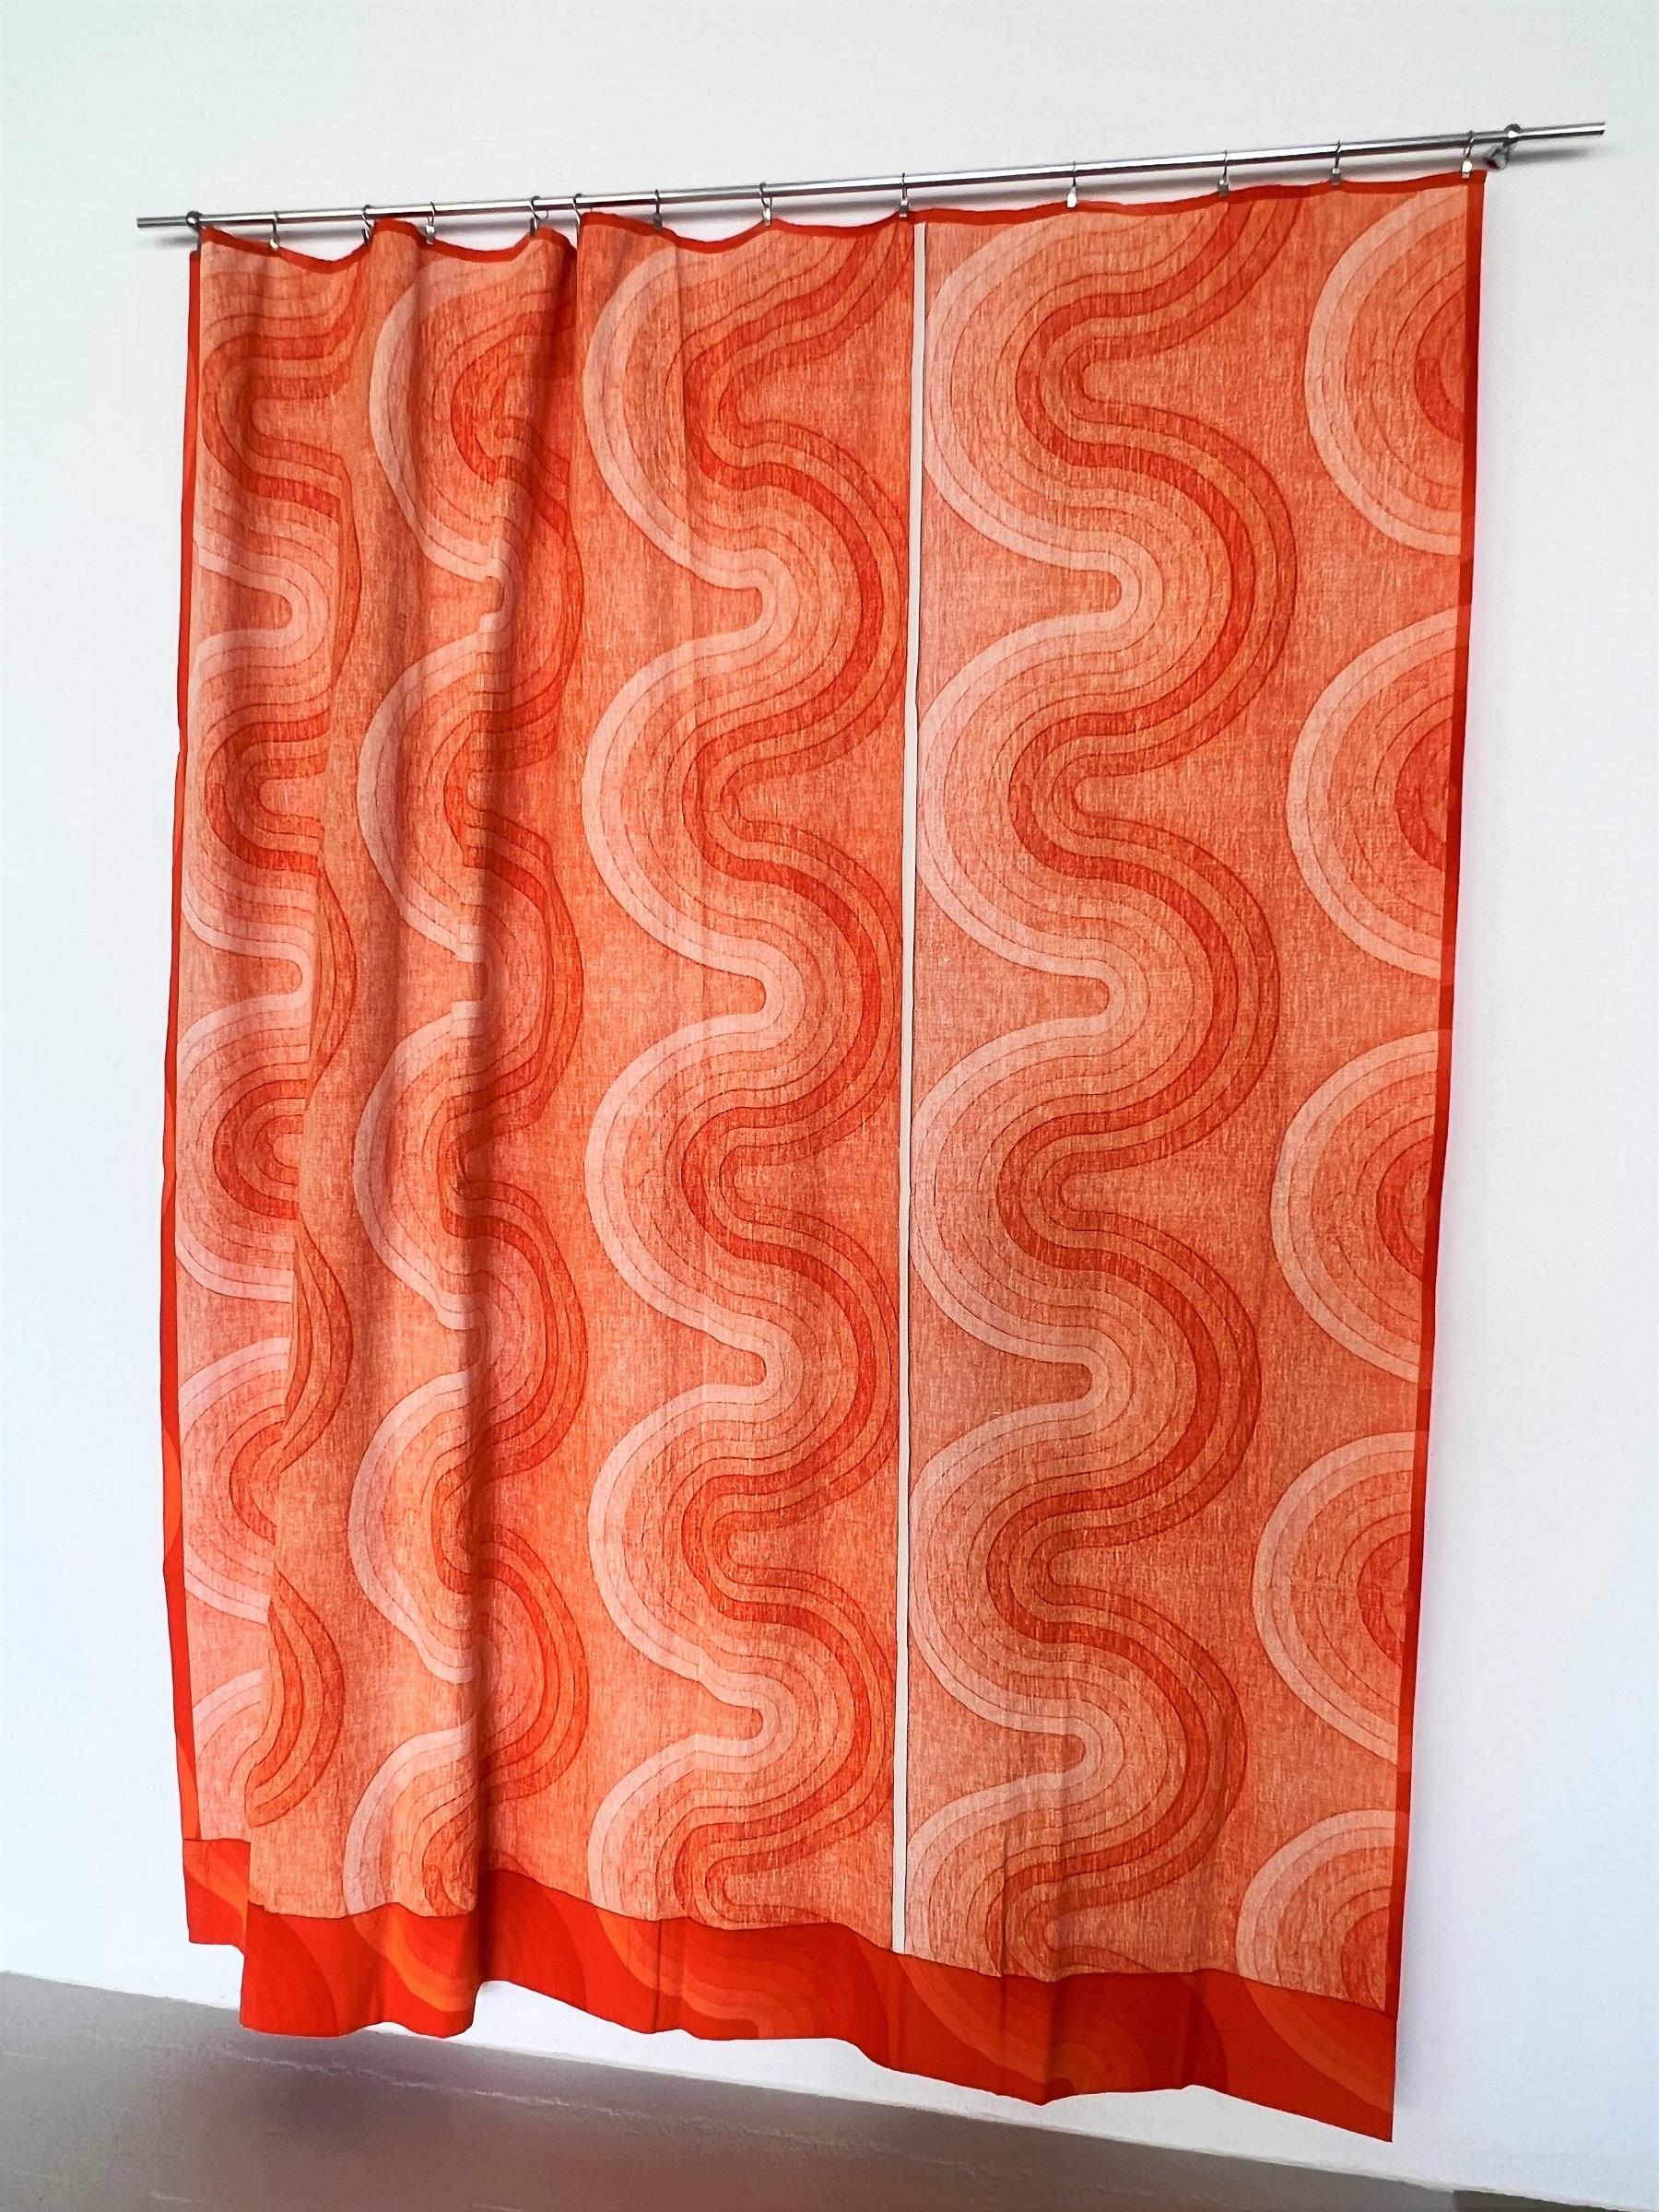 20th Century Verner Panton Original Fabric Panel Tapestry for Mira-X Collection, 1970s